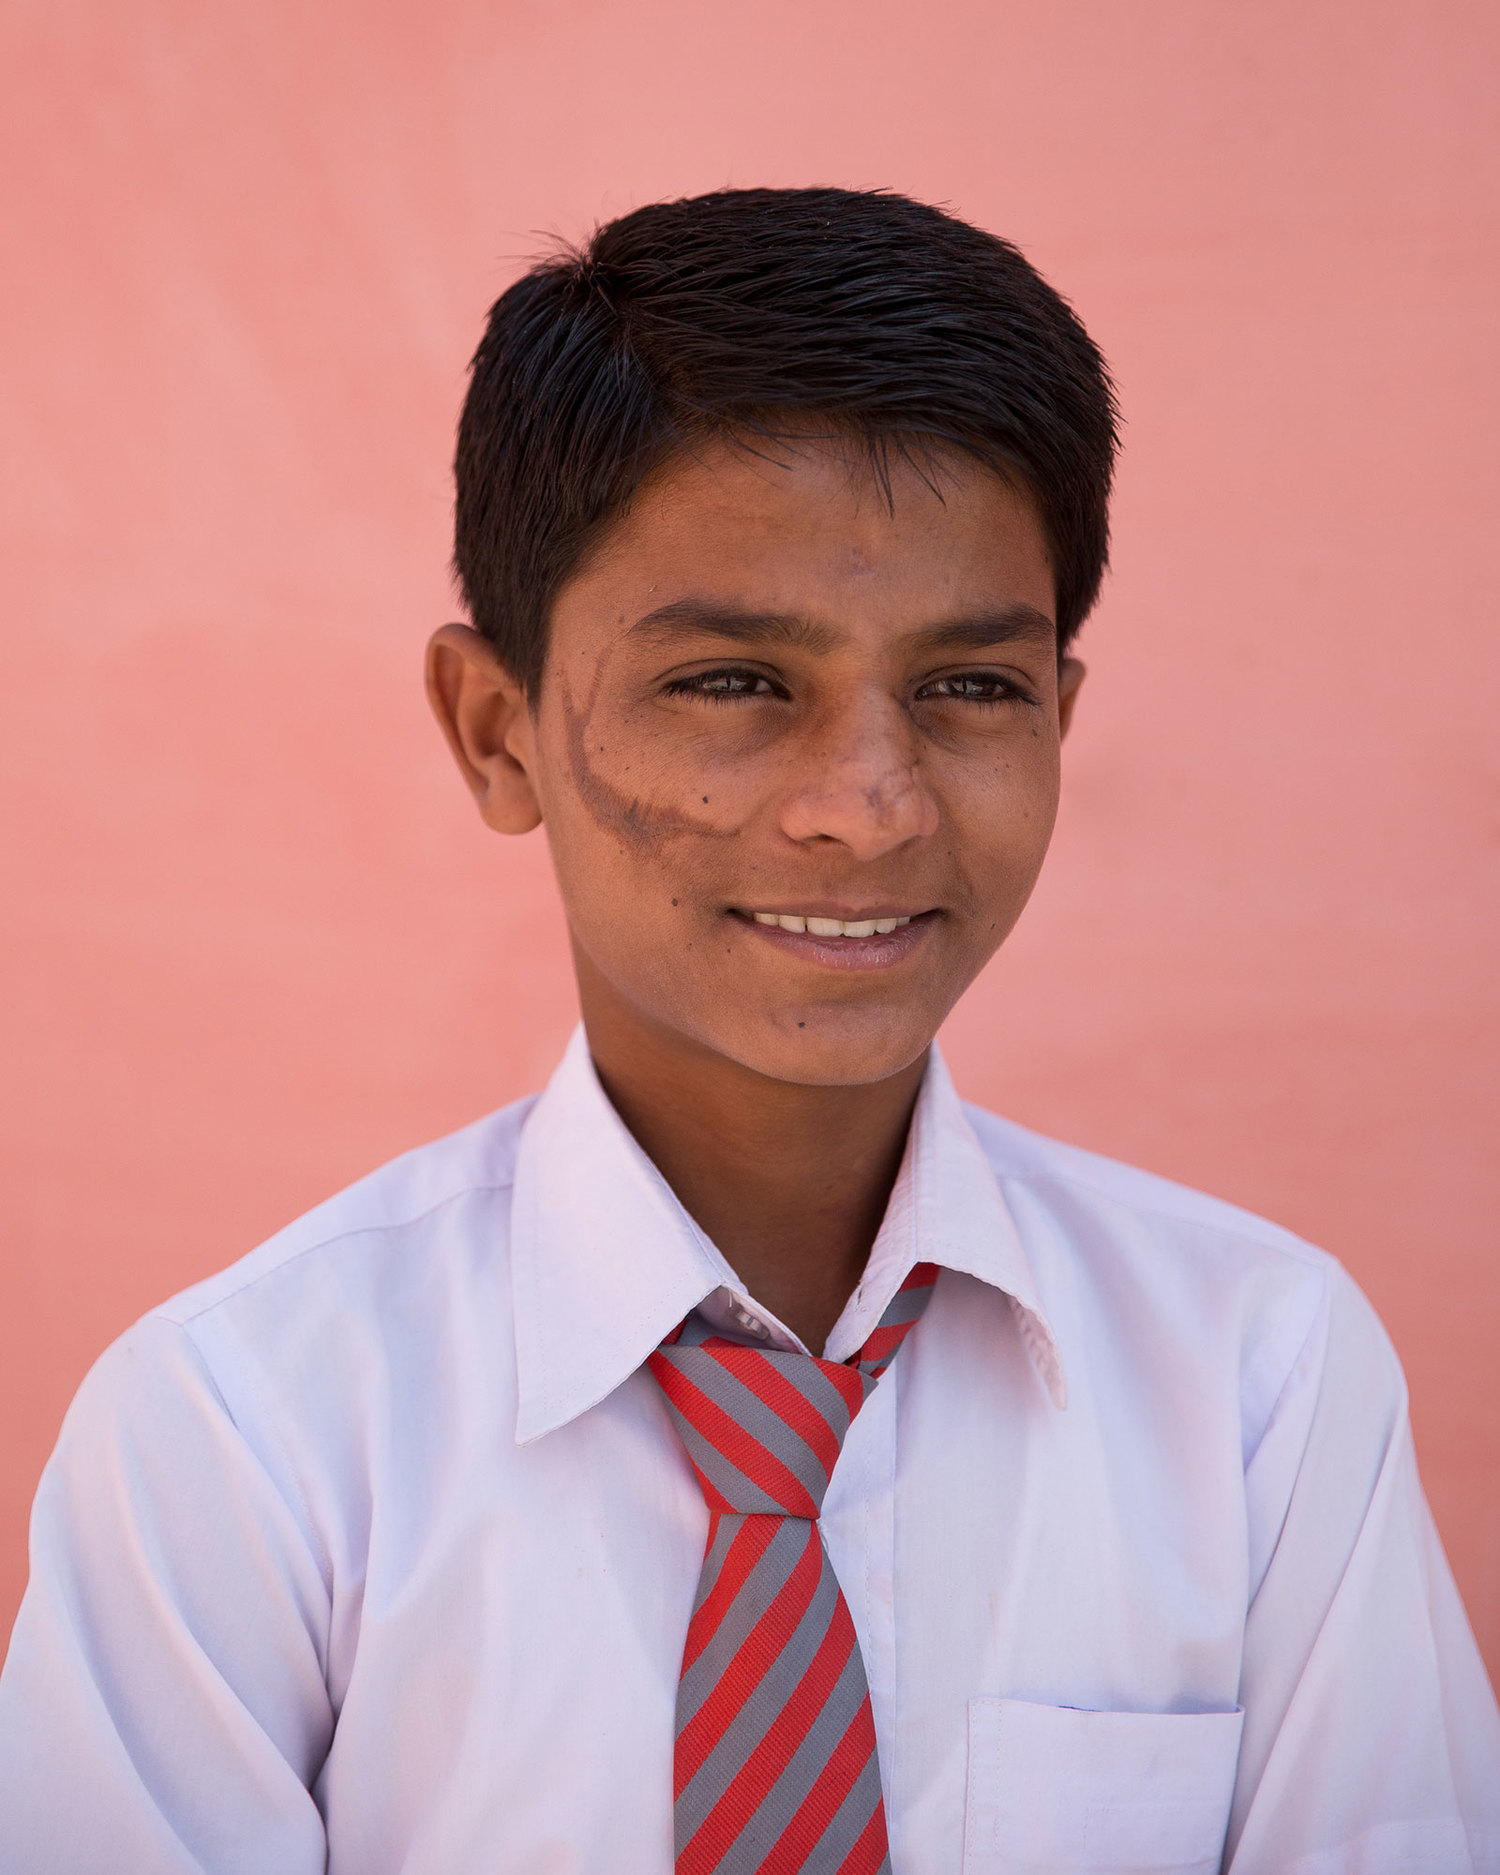   Kamlesh Gurjar, 8th class.  "I want to be an engineer so that I may discover something new, so I can help build up our country." 